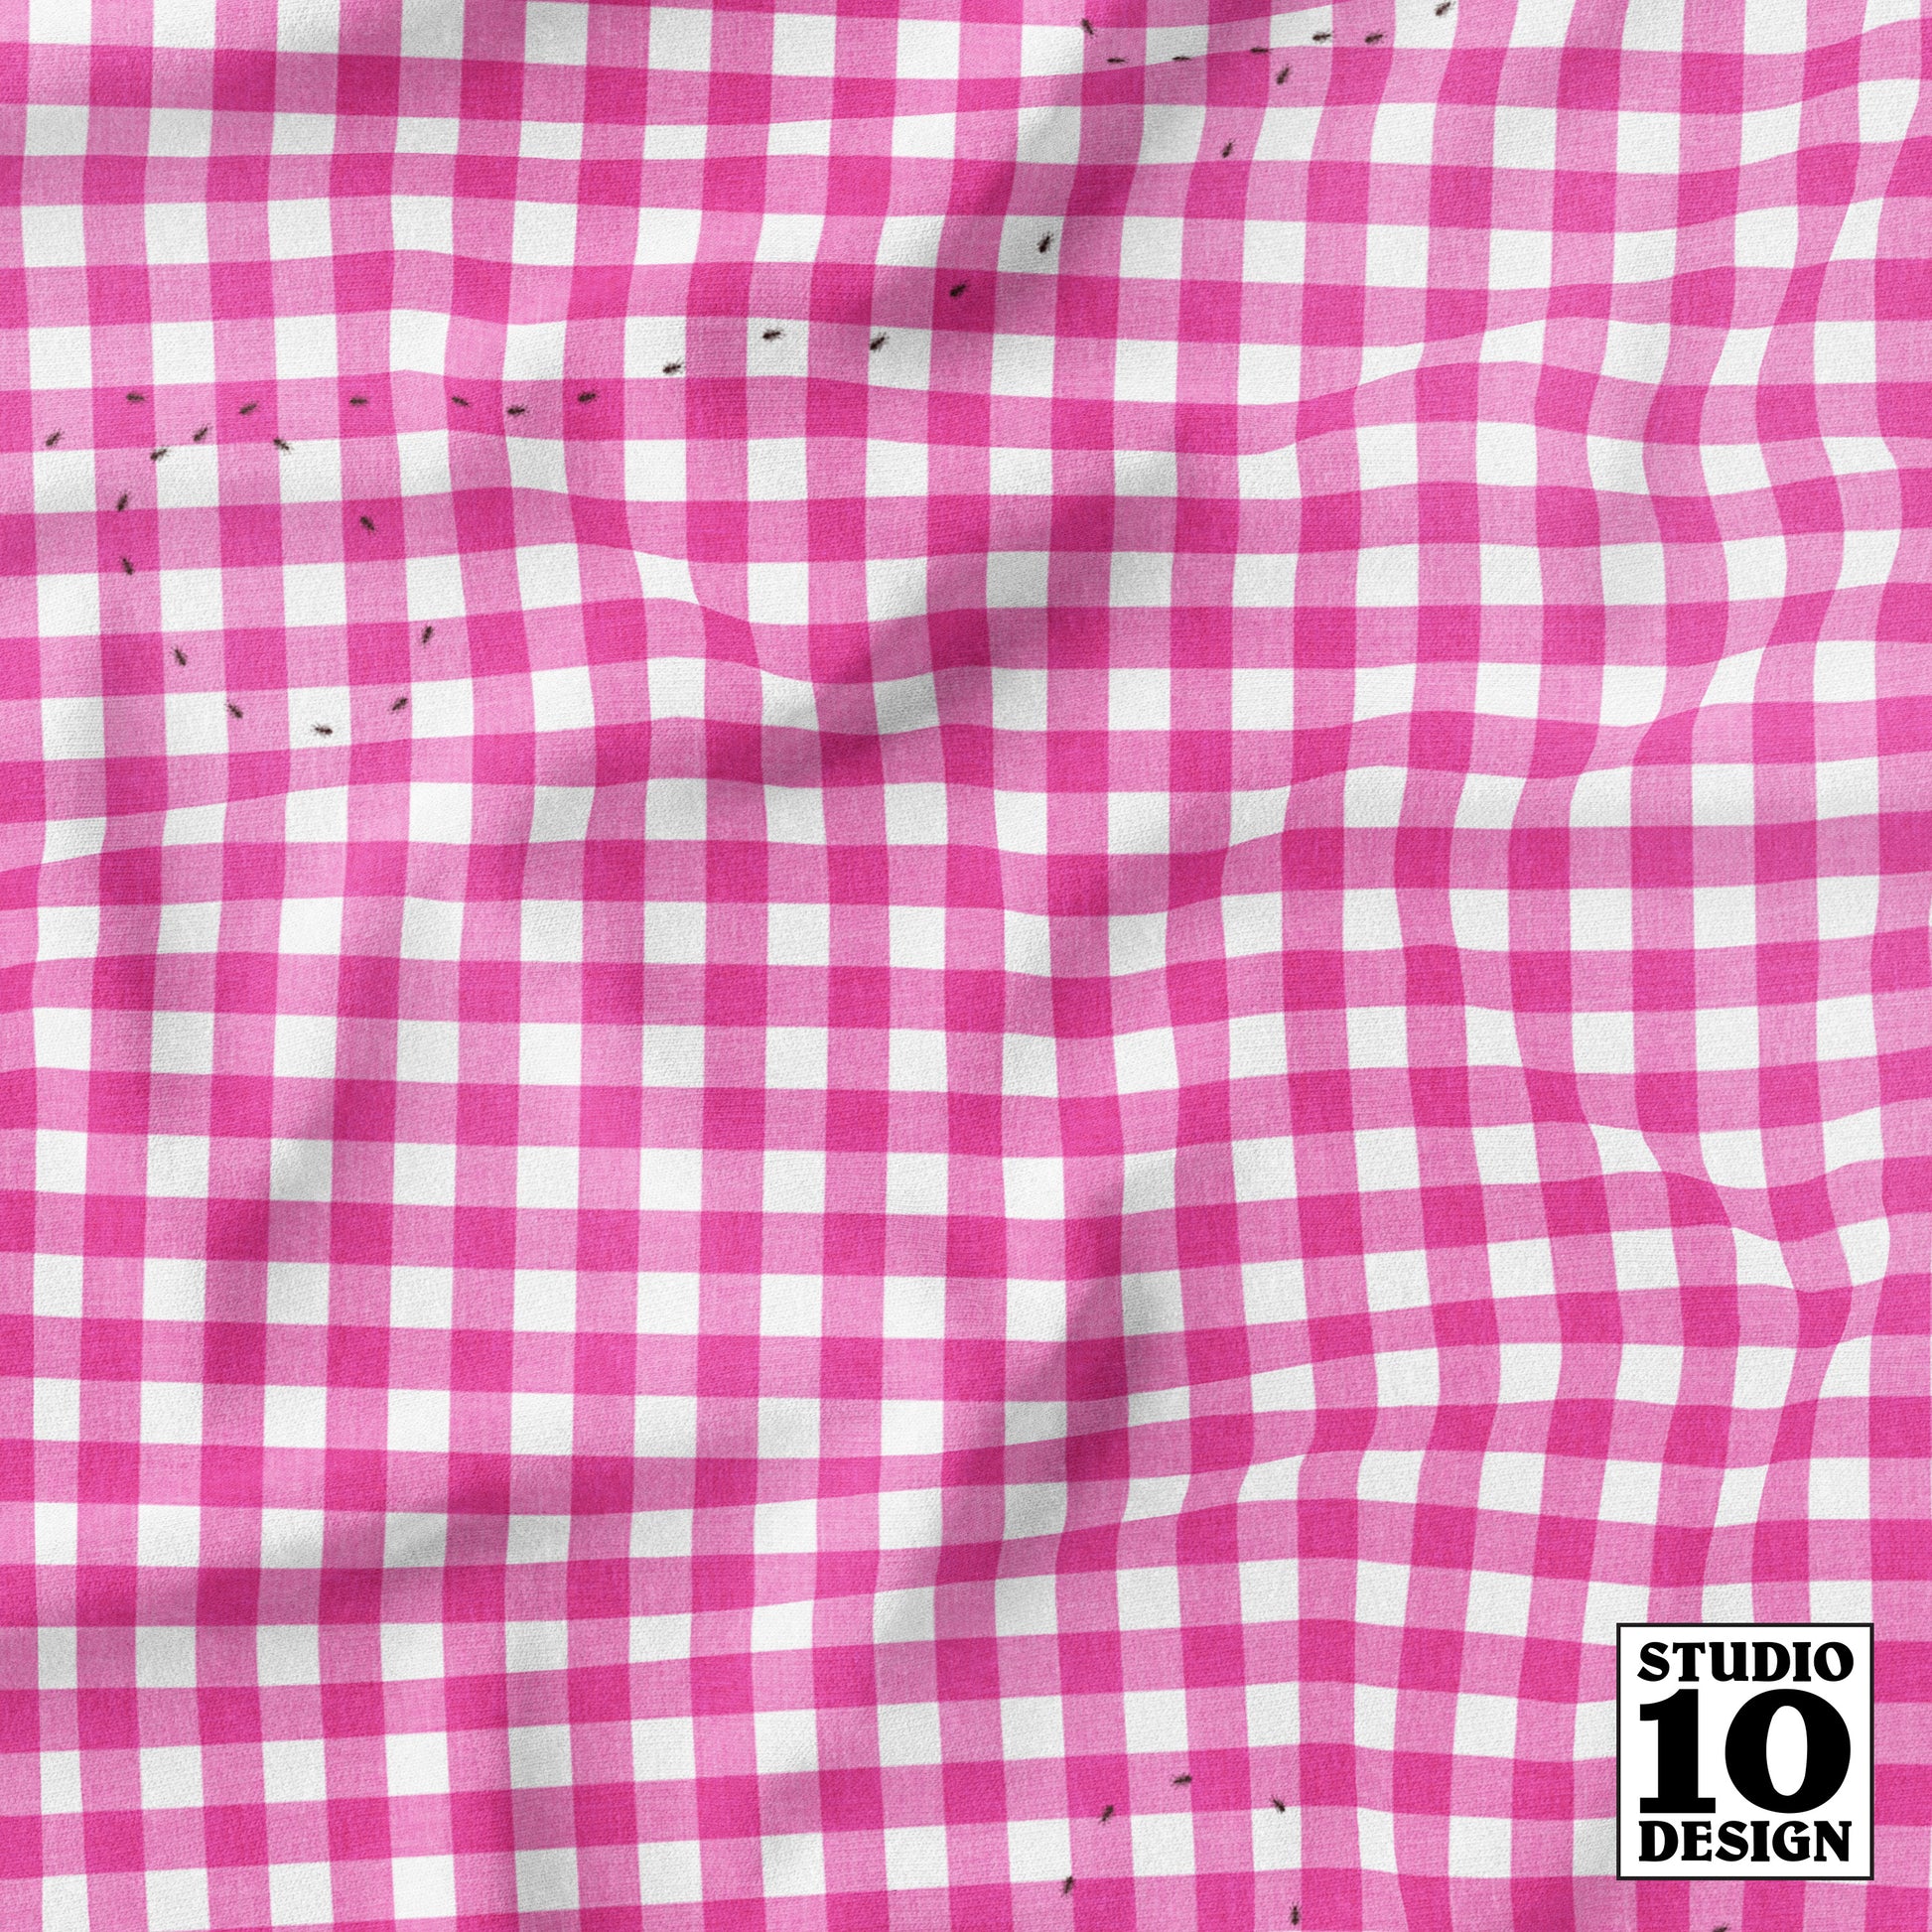 Ants at the Picnic, Pink Gingham Printed Fabric by Studio Ten Design